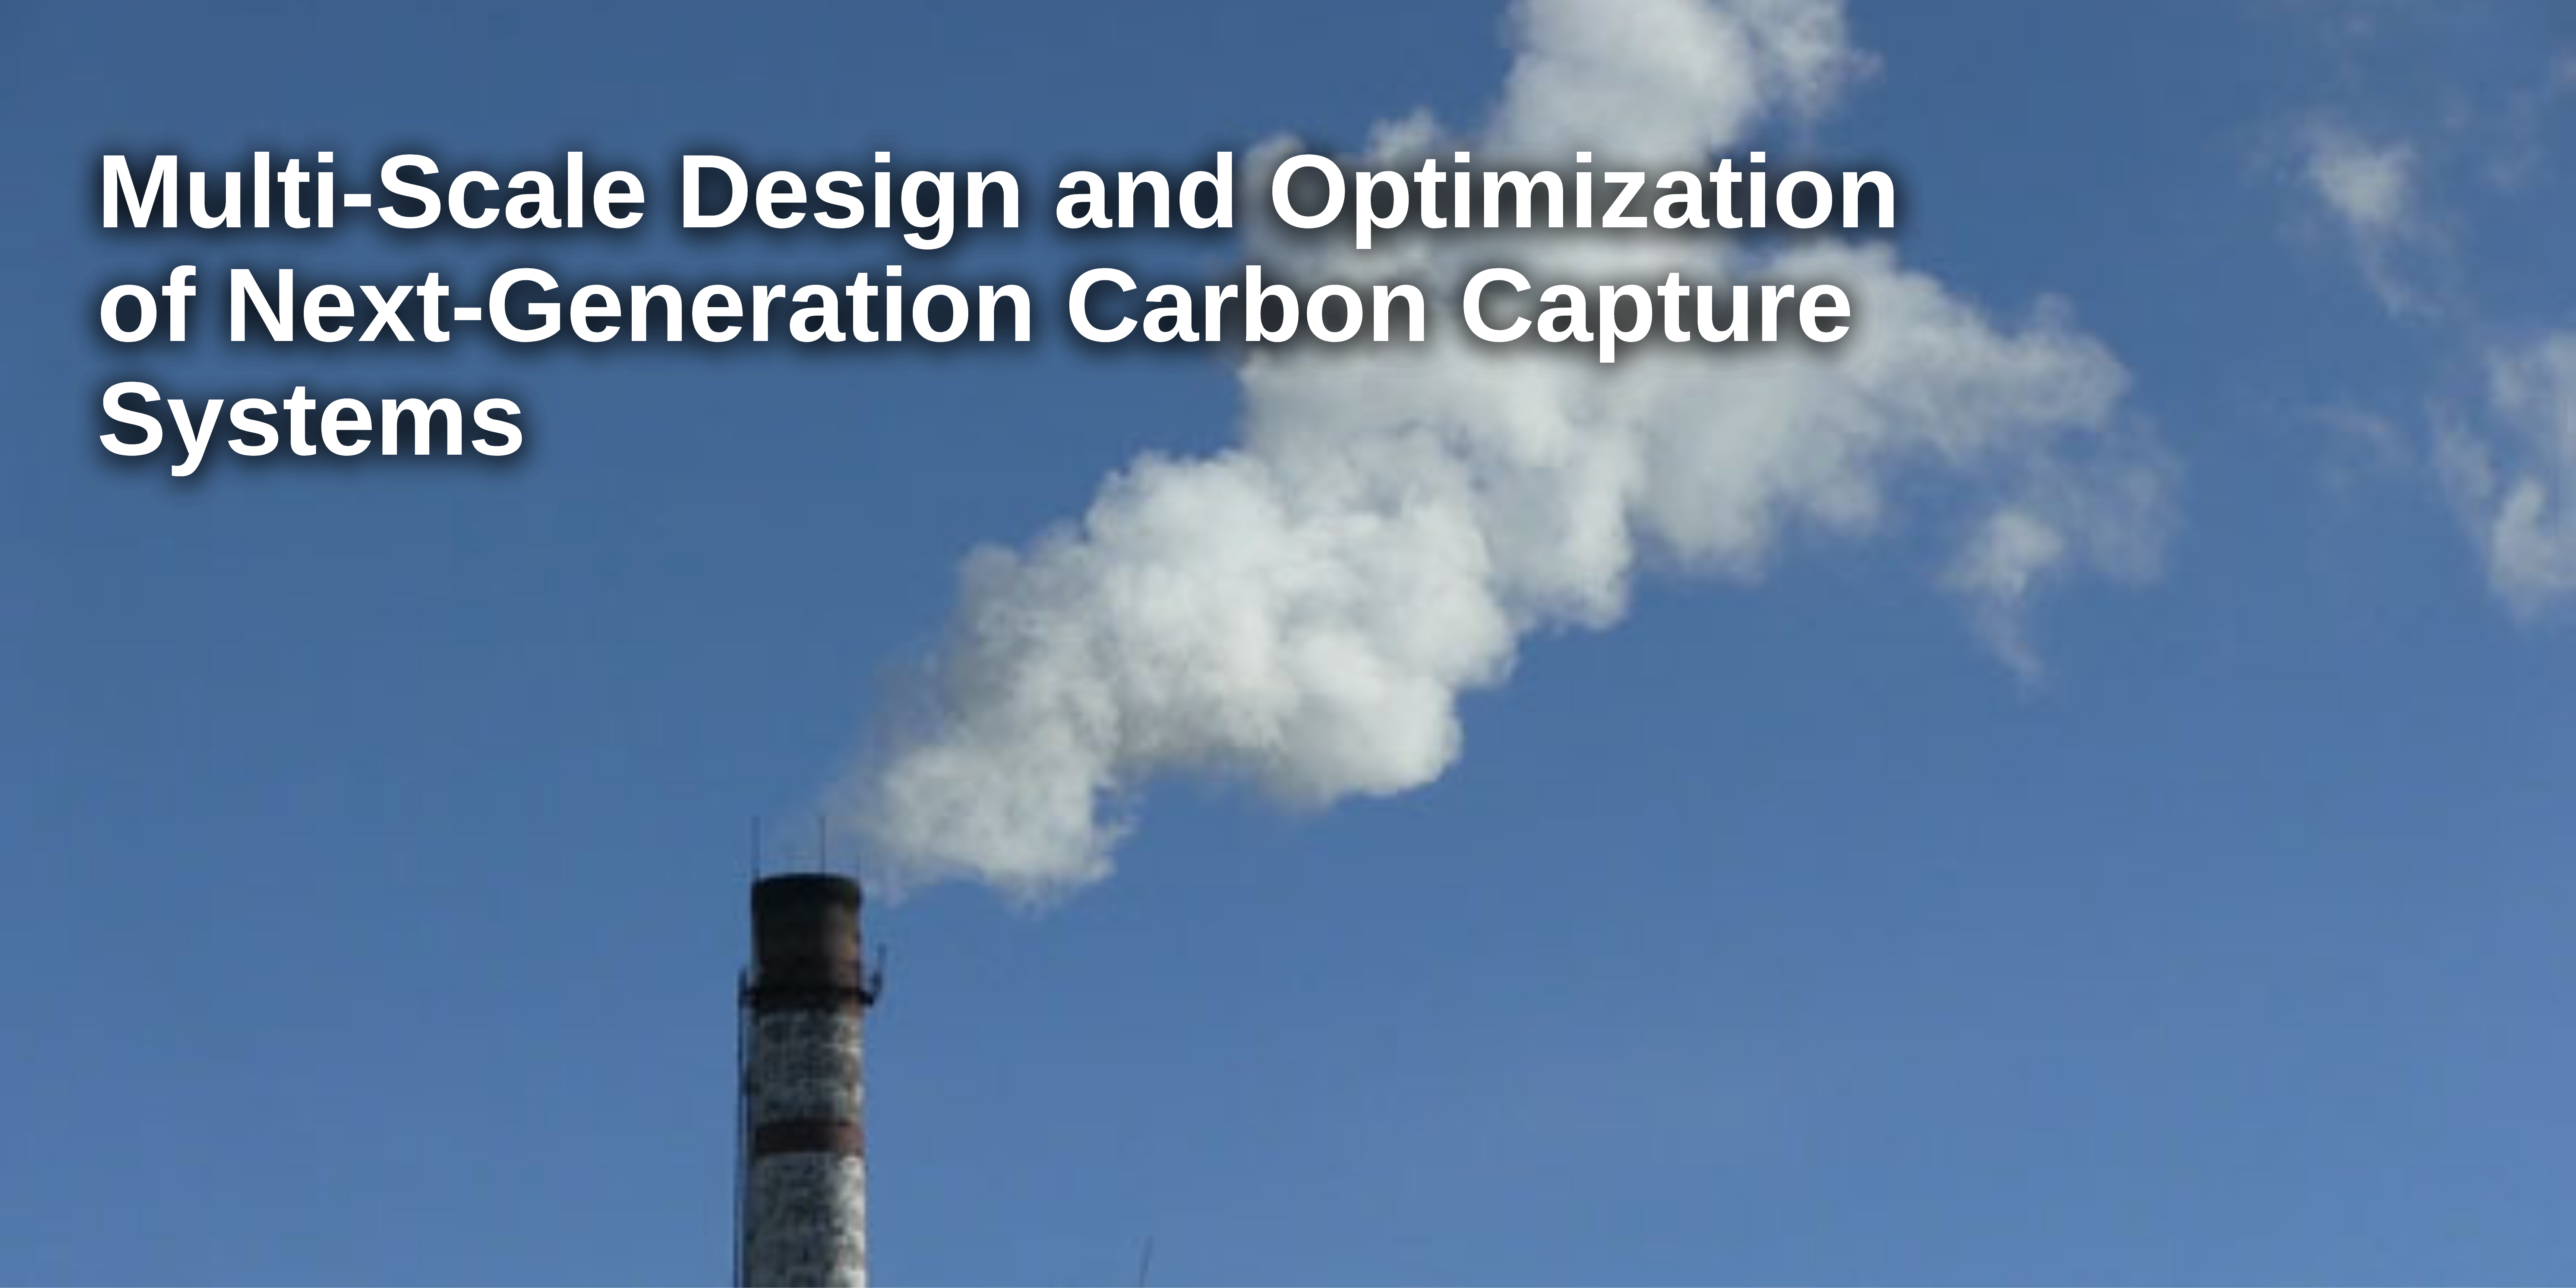 Multi-Scale Design and Optimization of Next-Generation Carbon Capture Systems